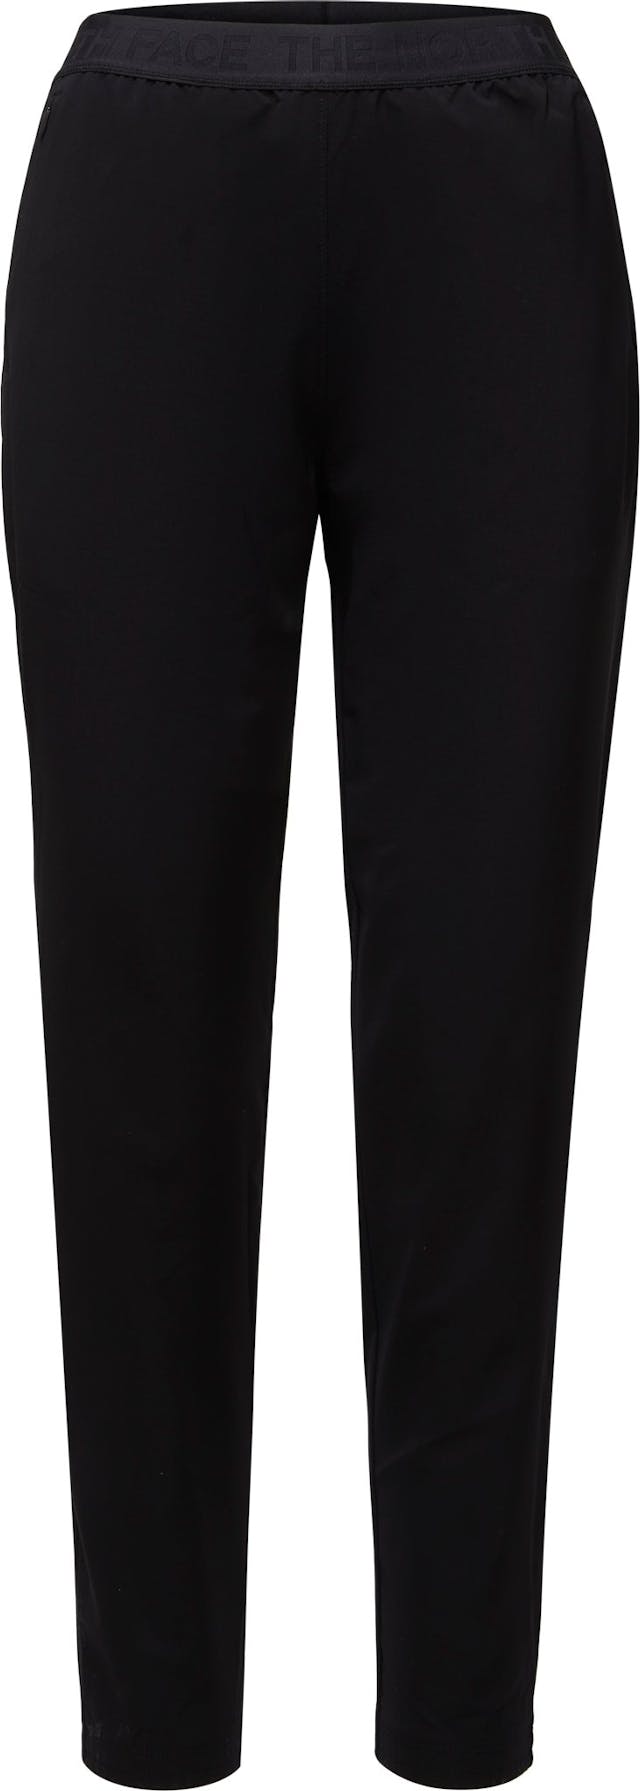 Product image for Wander Jogger - Women's